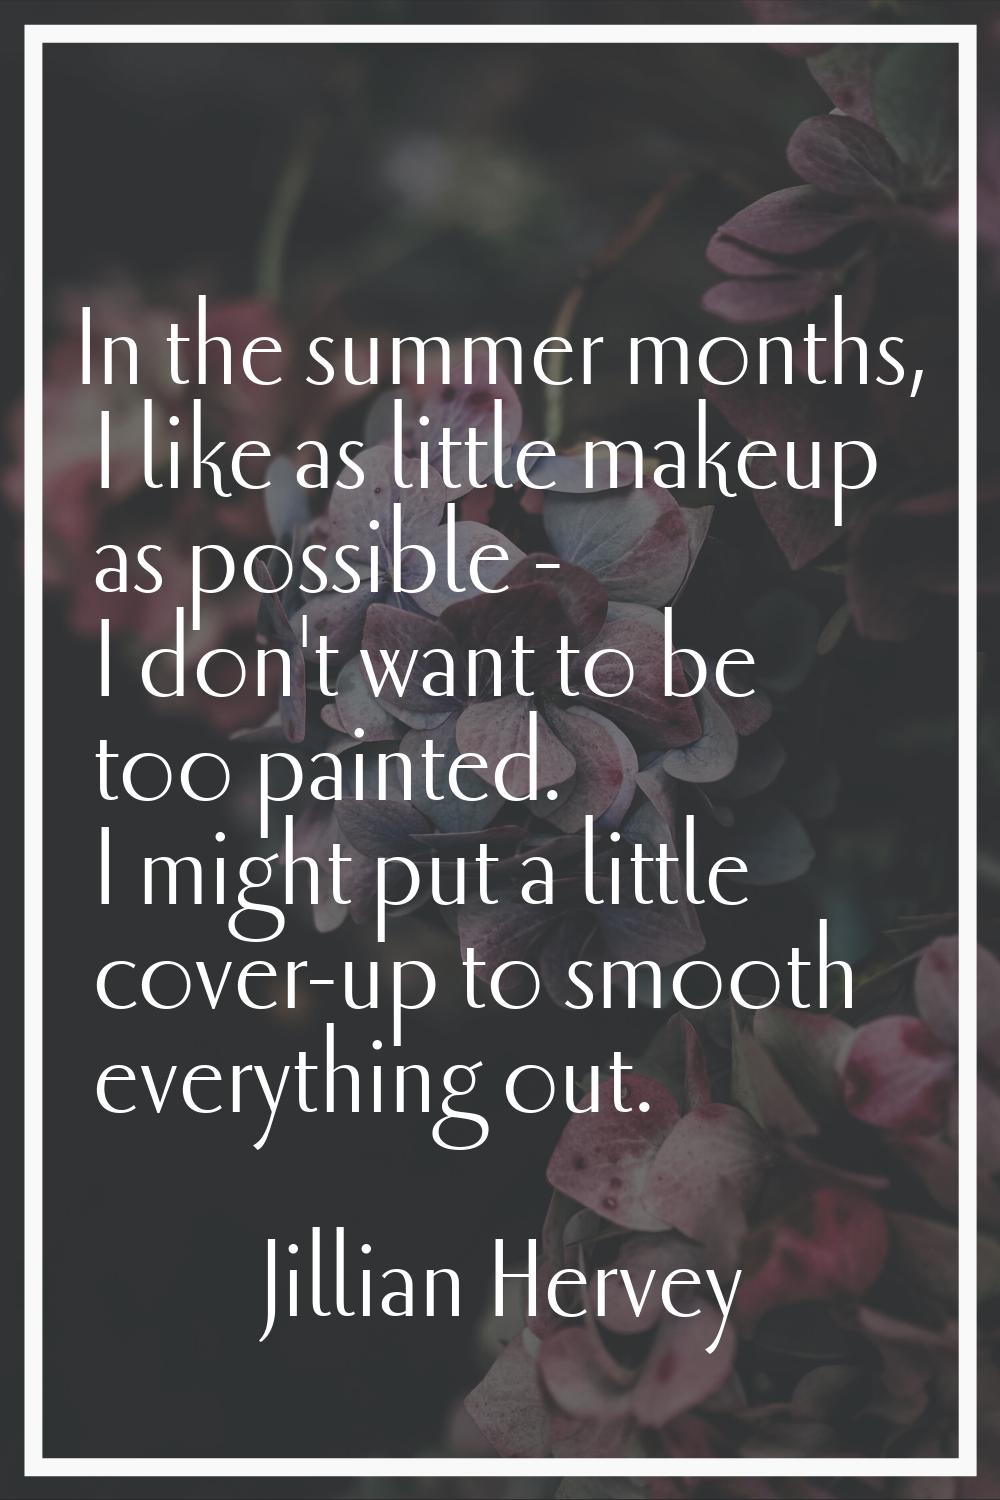 In the summer months, I like as little makeup as possible - I don't want to be too painted. I might